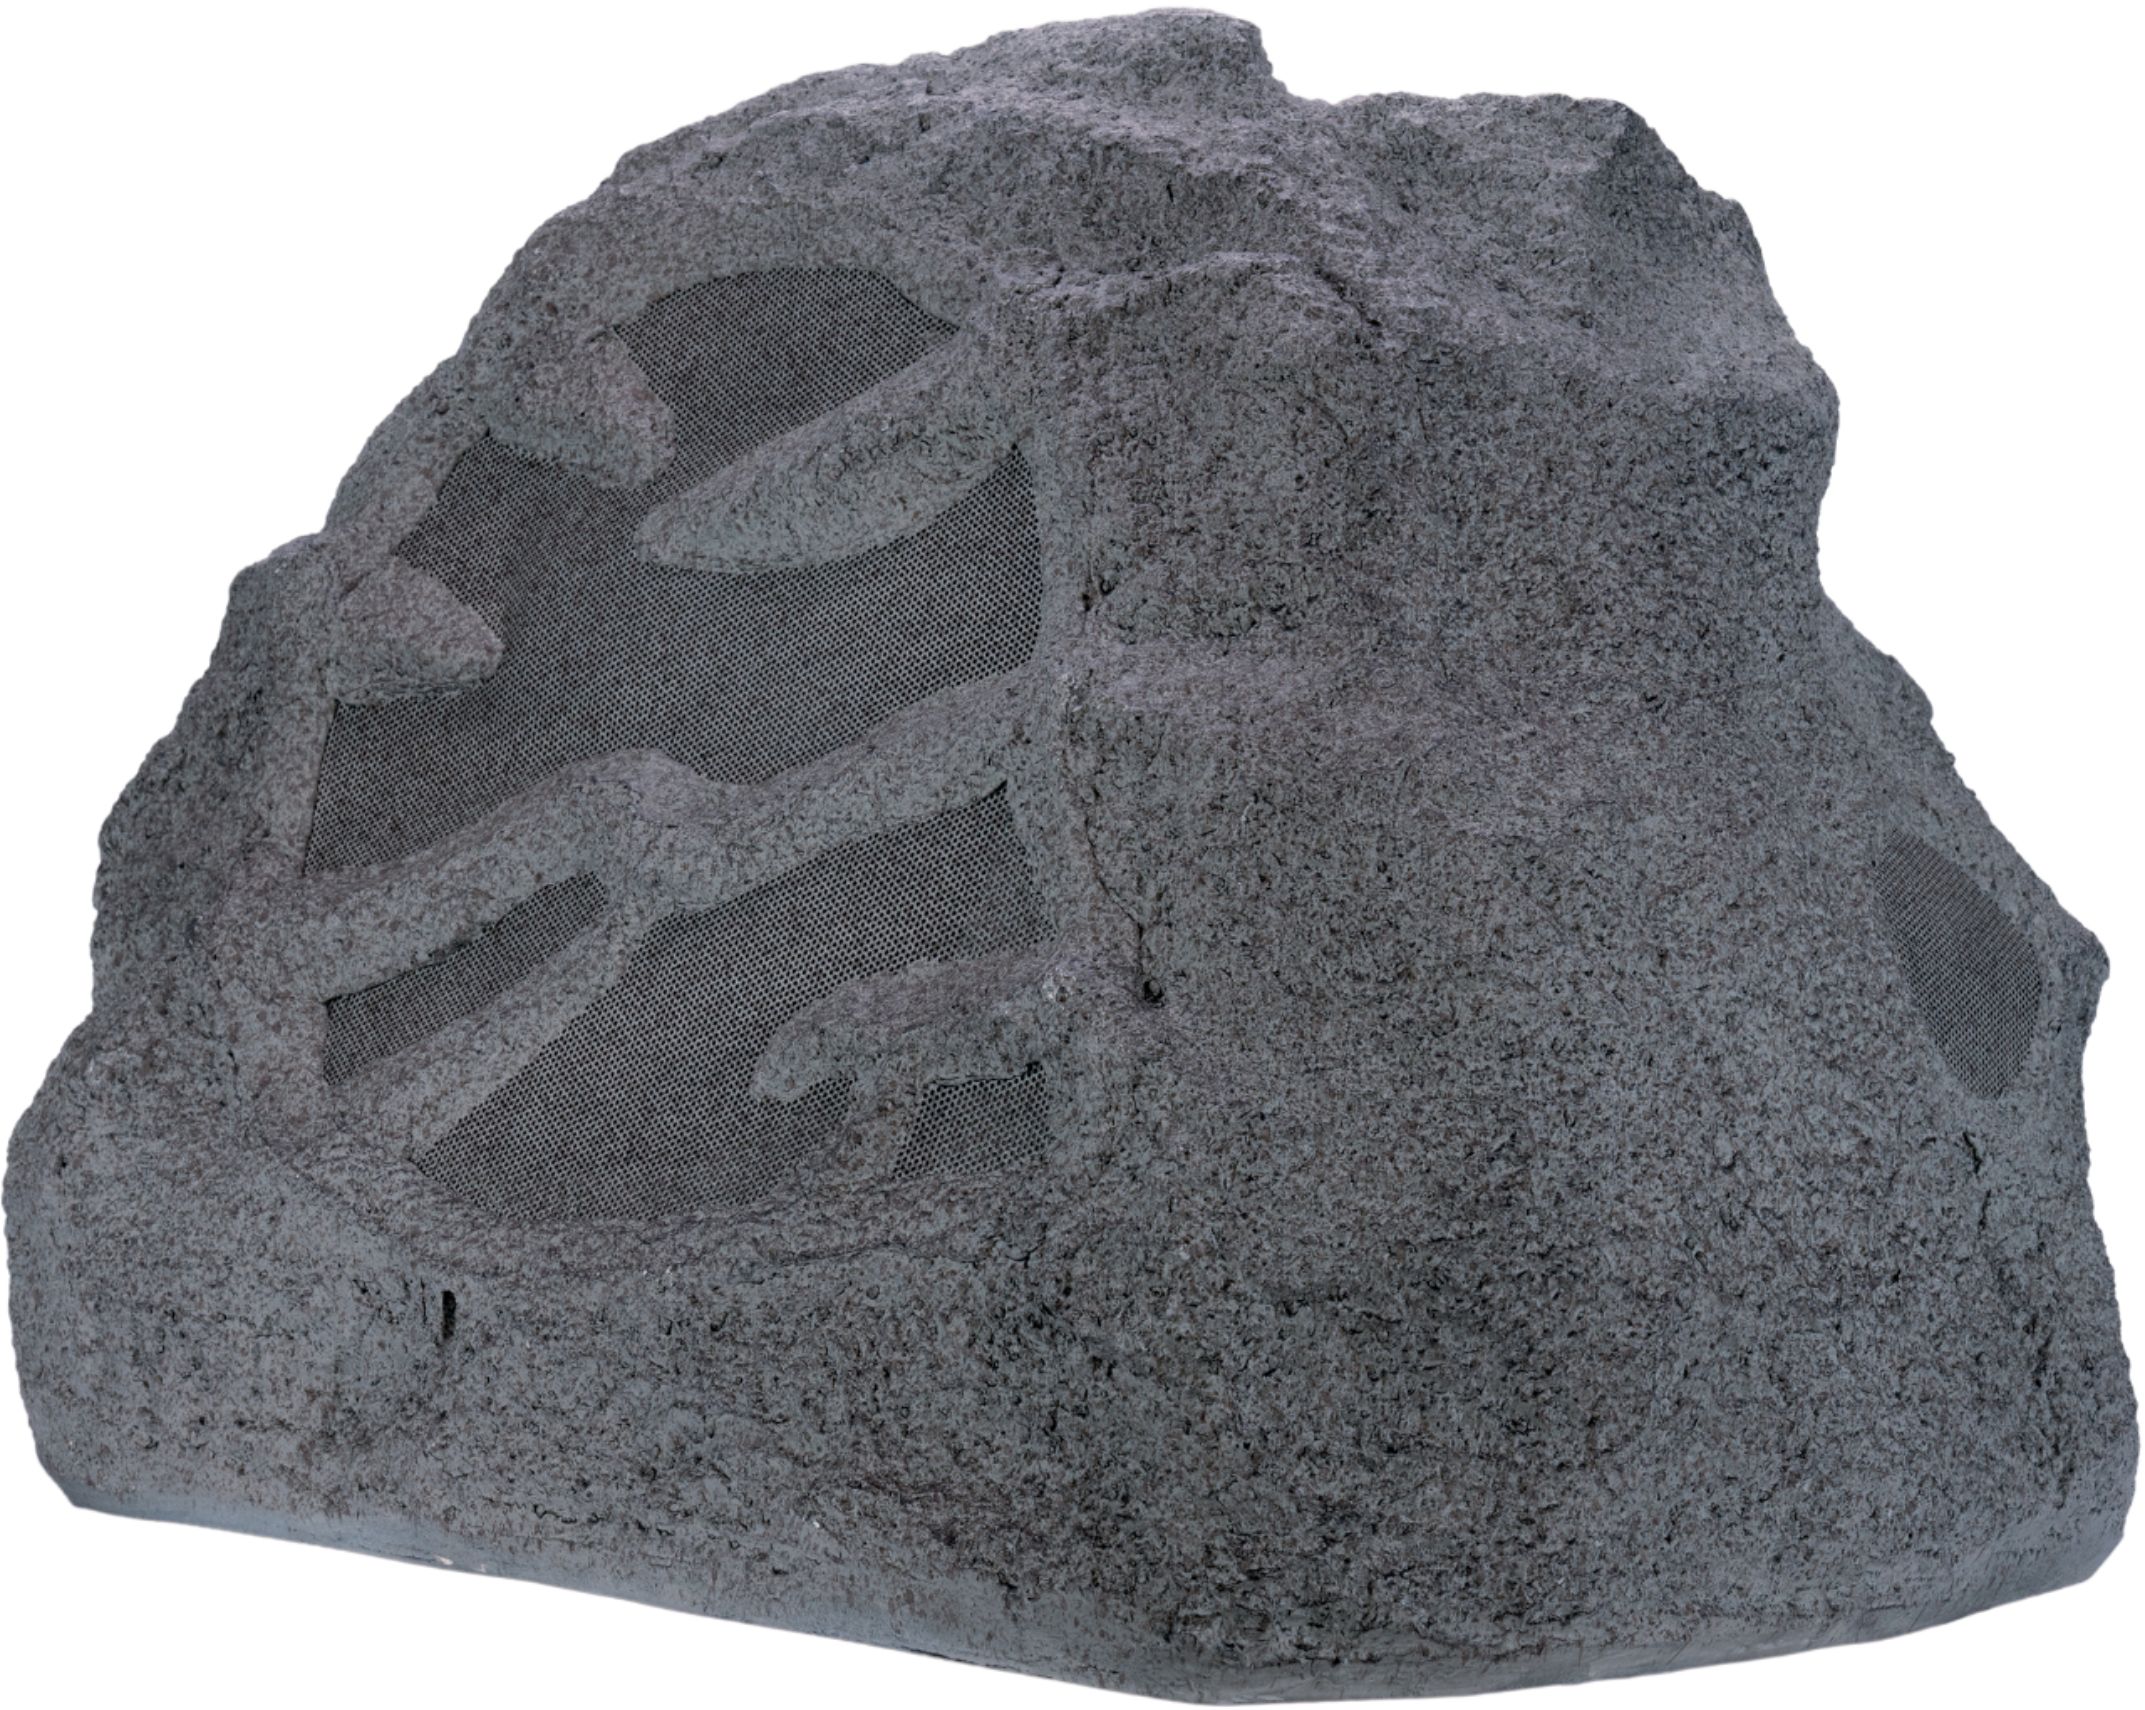 Left View: Sonance - MAGROCKS2.1 - Mag Series 2.1-Ch. Outdoor Rock Speaker System (Each) - Charcoal Gray Granite